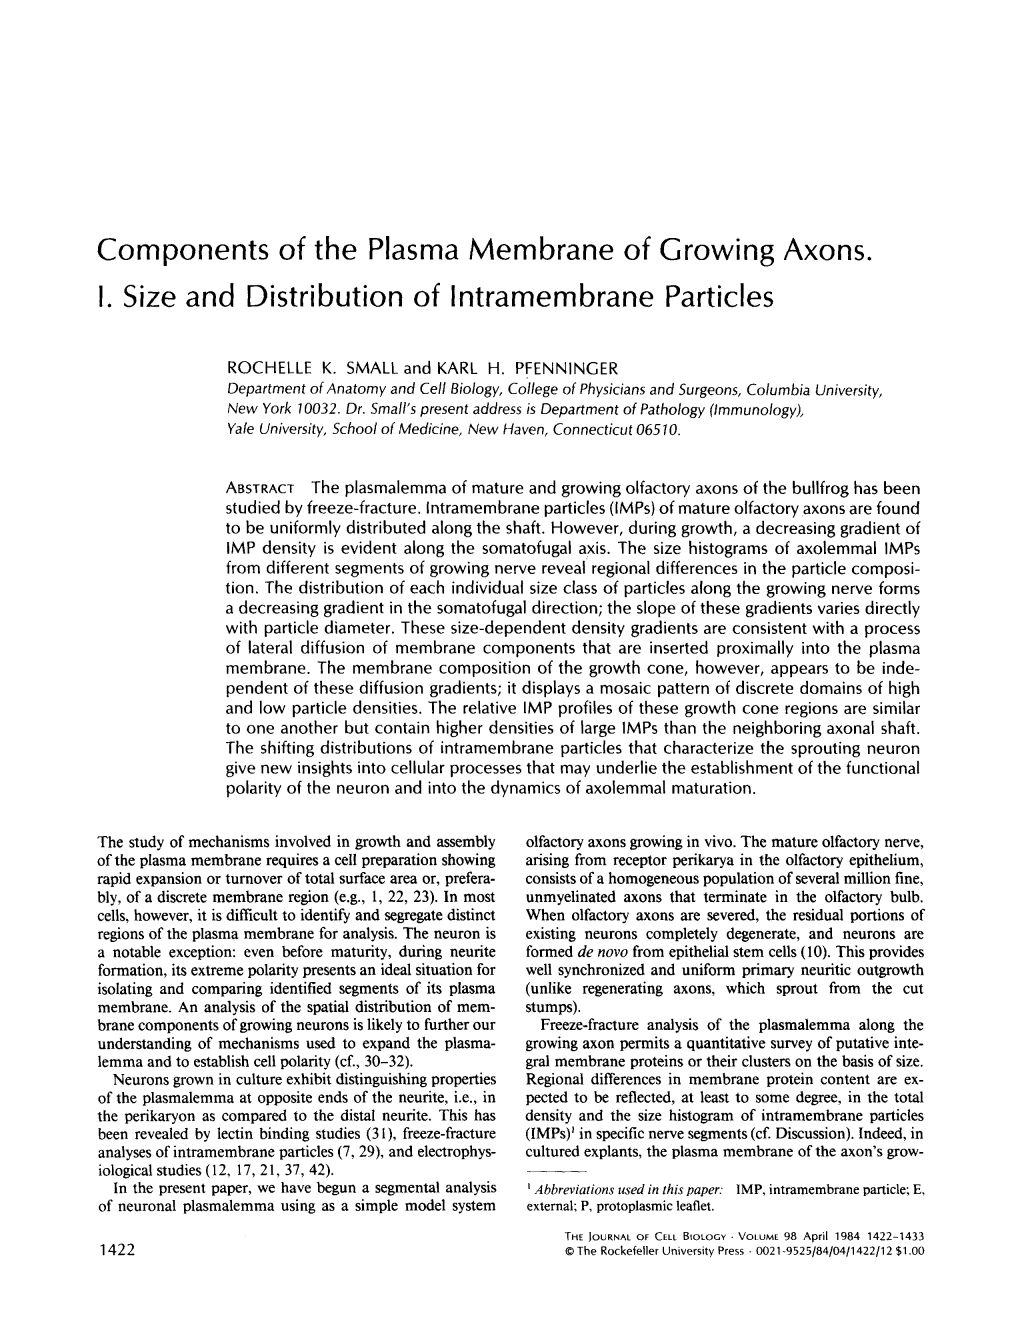 Components of the Plasma Membrane of Growing Axons. I. Size And